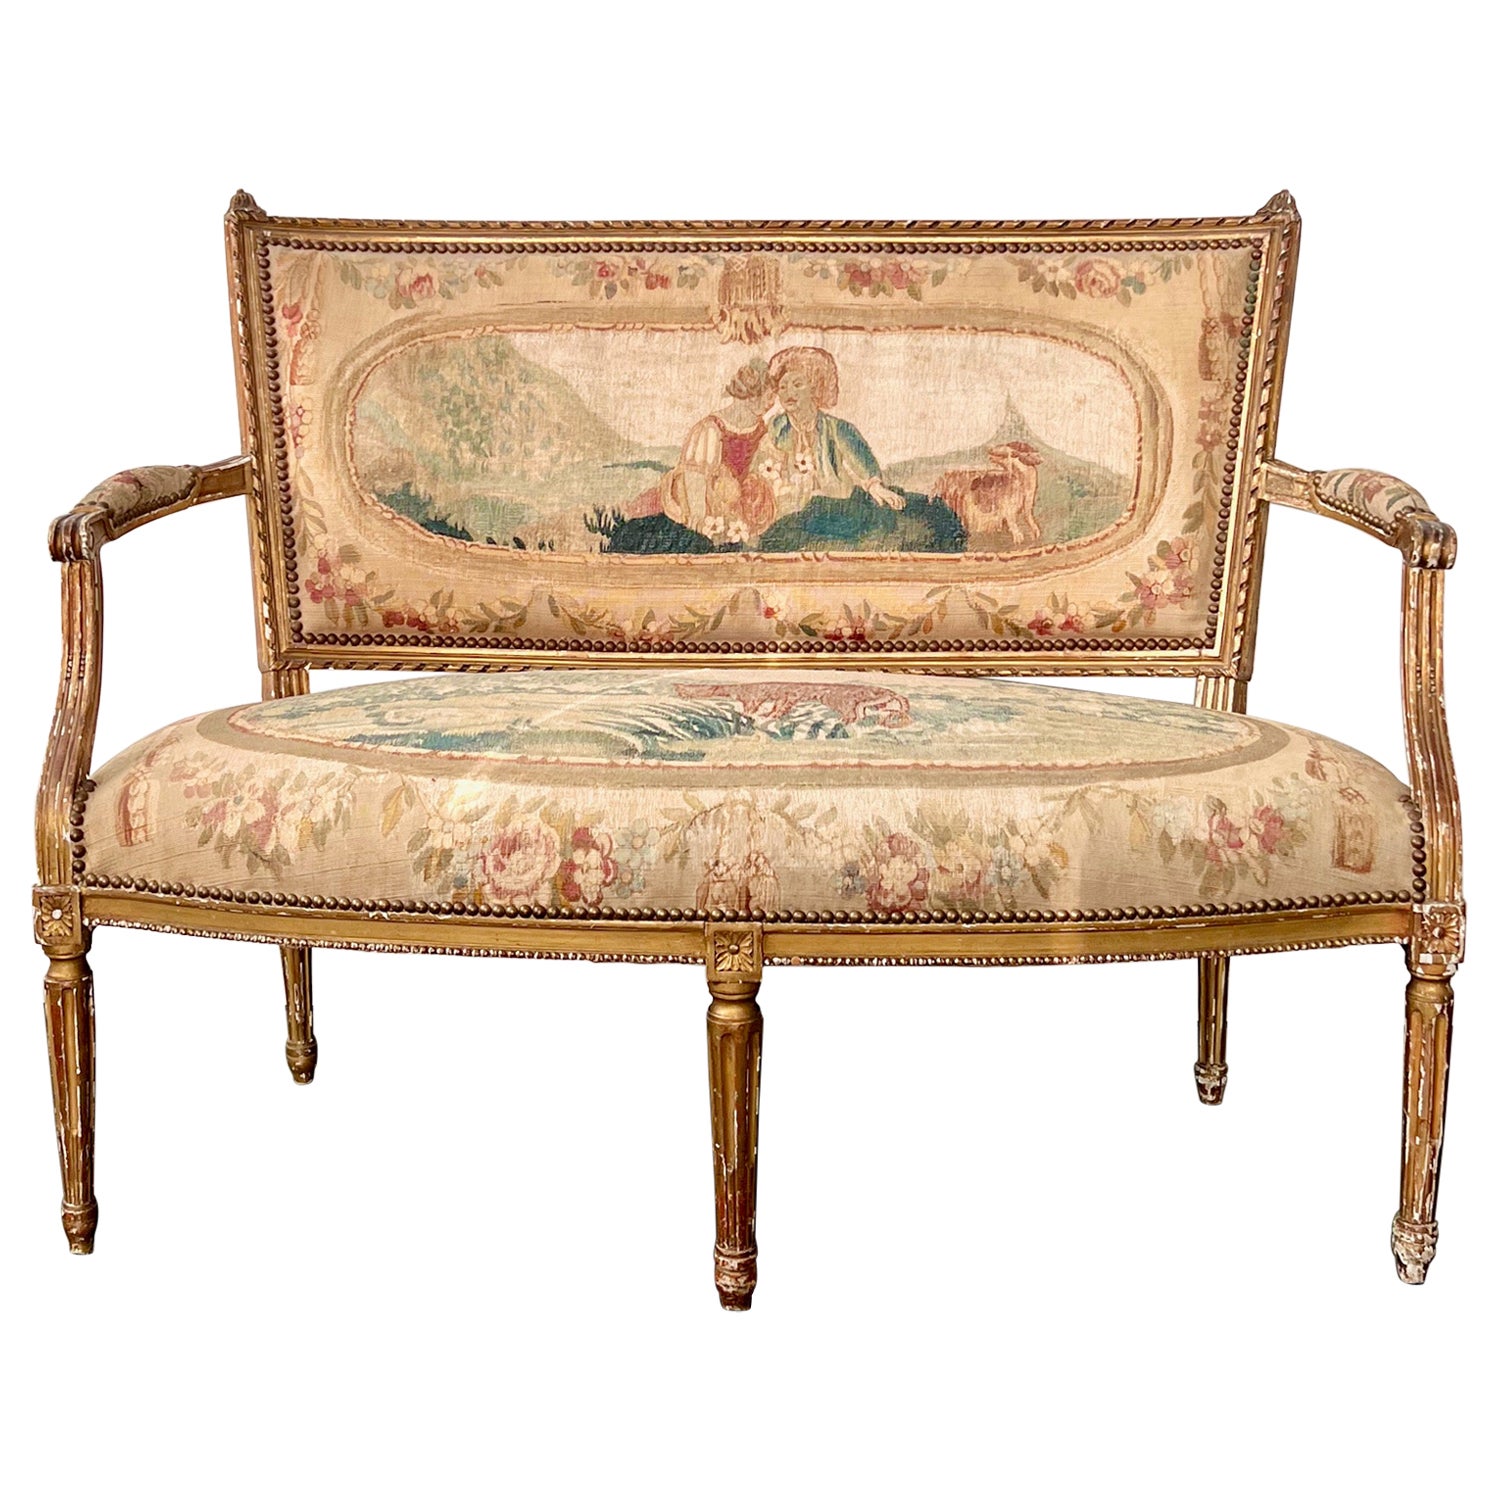 19th century French LXVI Style Gilt-wood Settee in Aubusson Tapestry Upholstery  For Sale